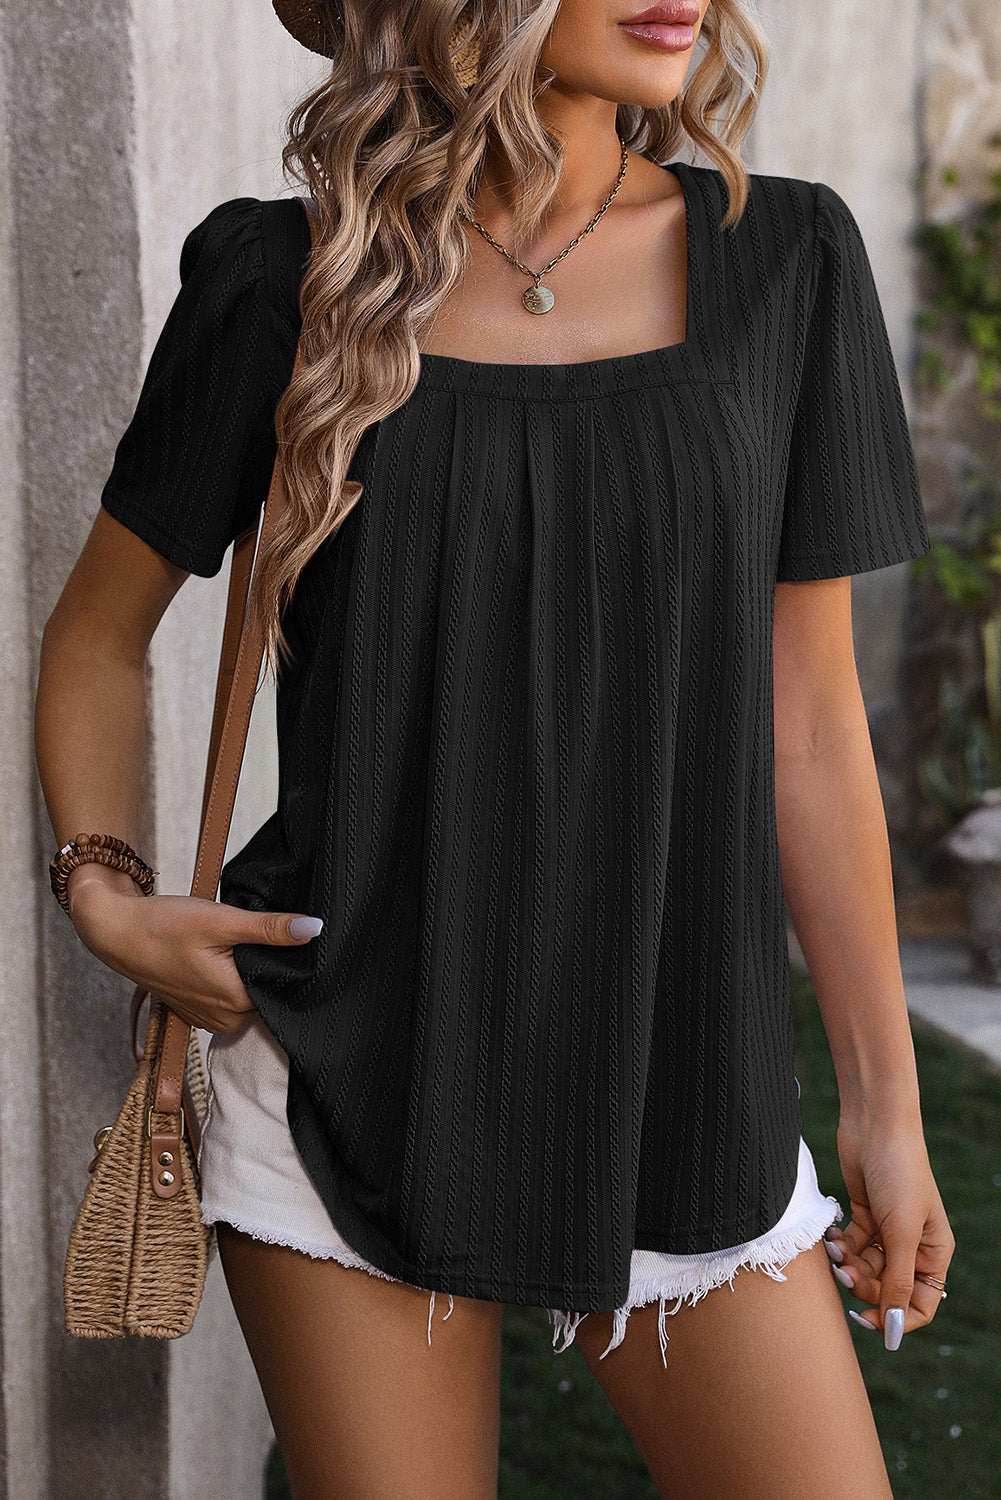 Black Chic Texture Square Neck Short Sleeve Babydoll Top